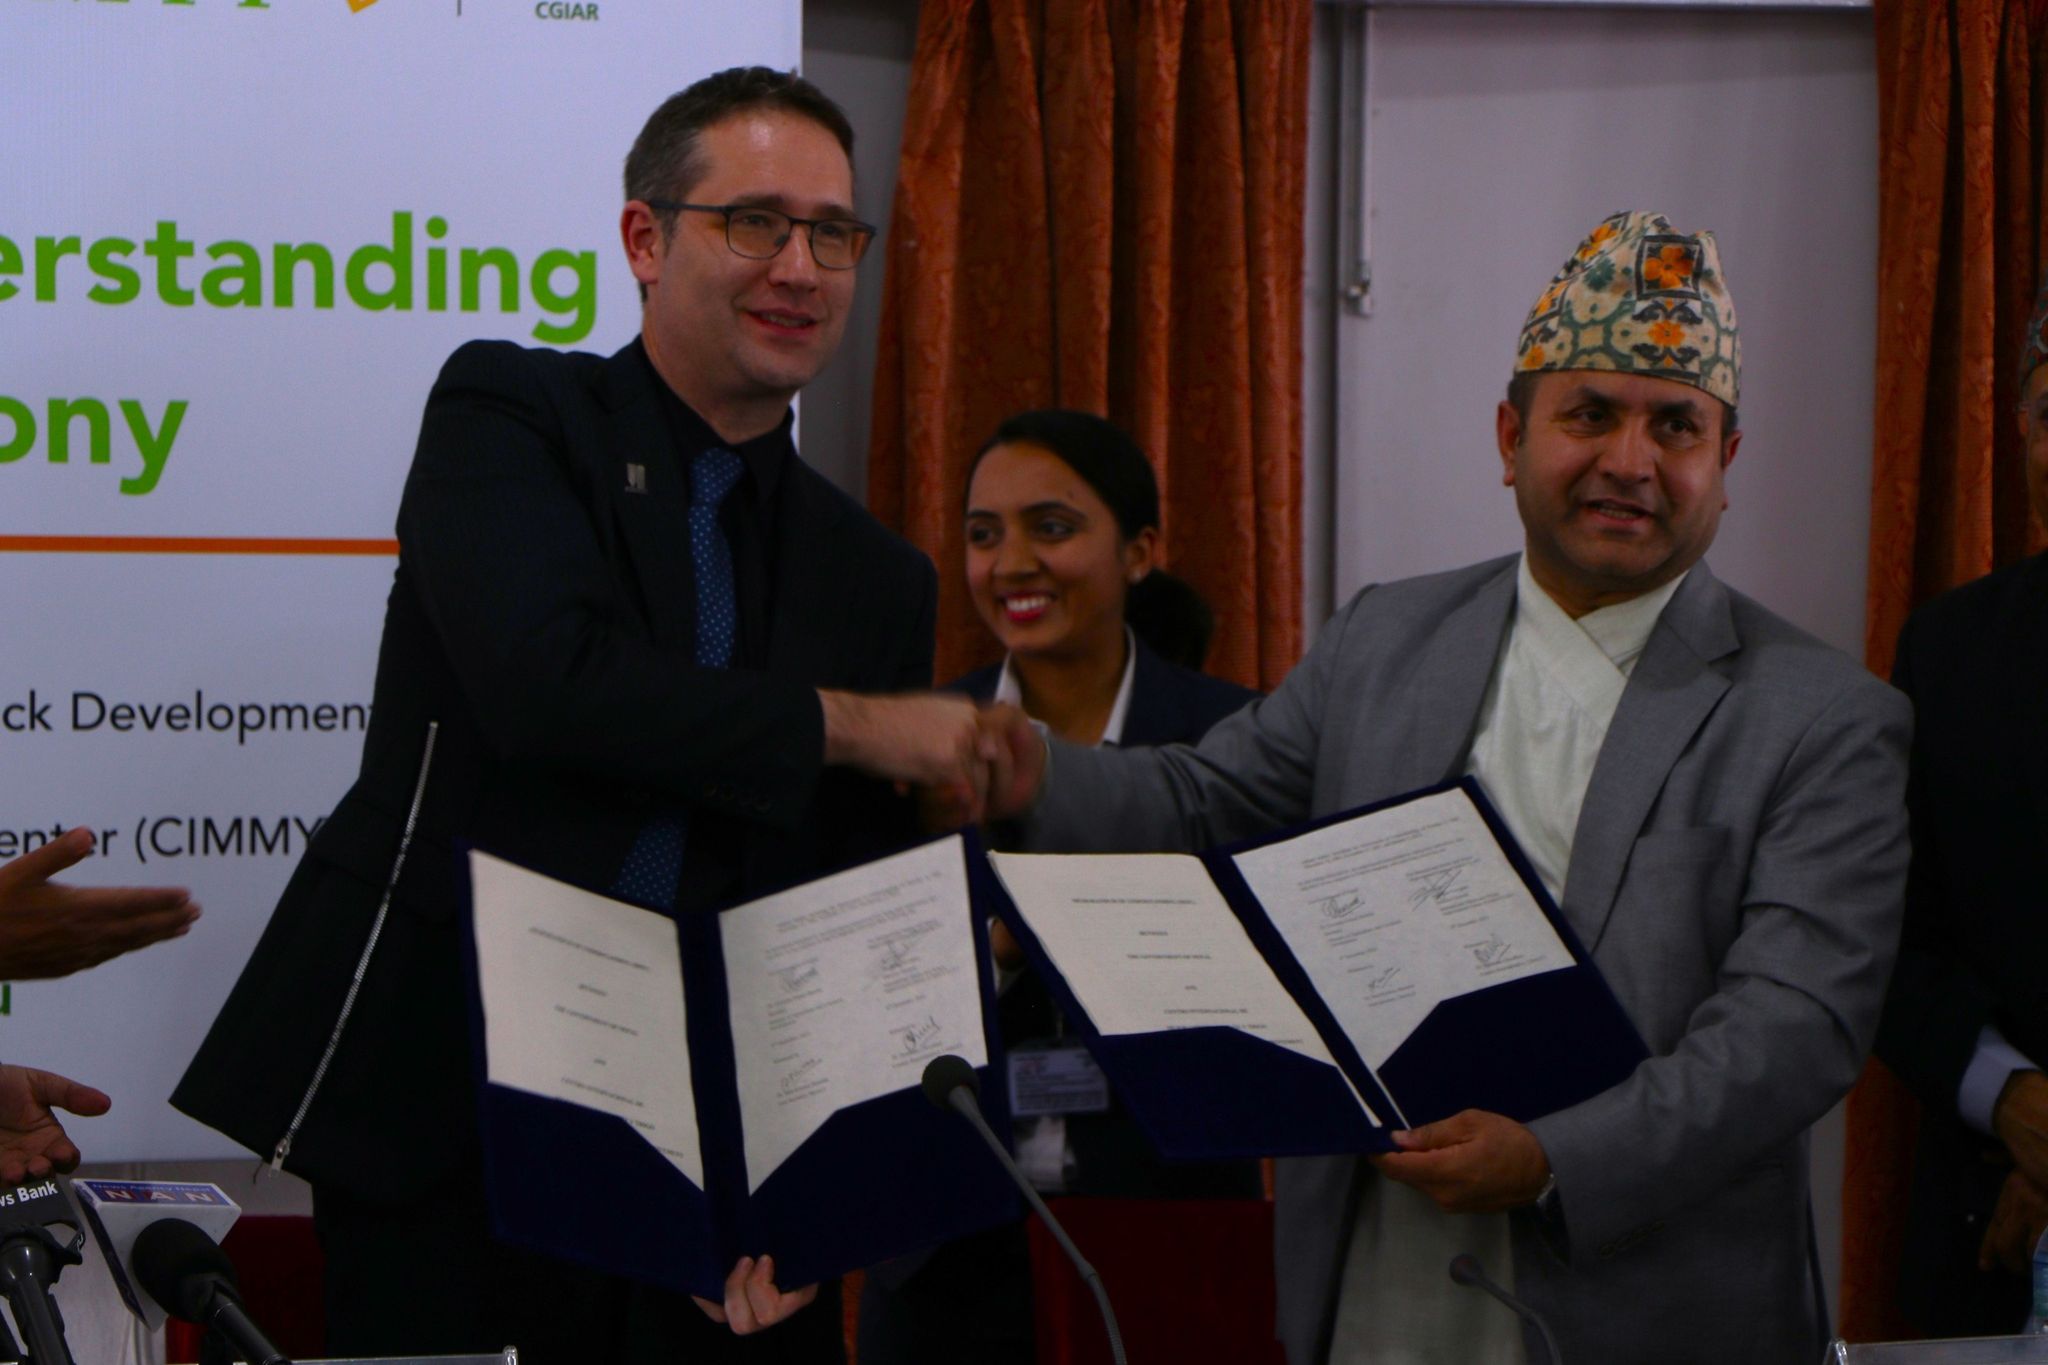 Nepal and CIMMYT forge decade-long partnership to advance agricultural science